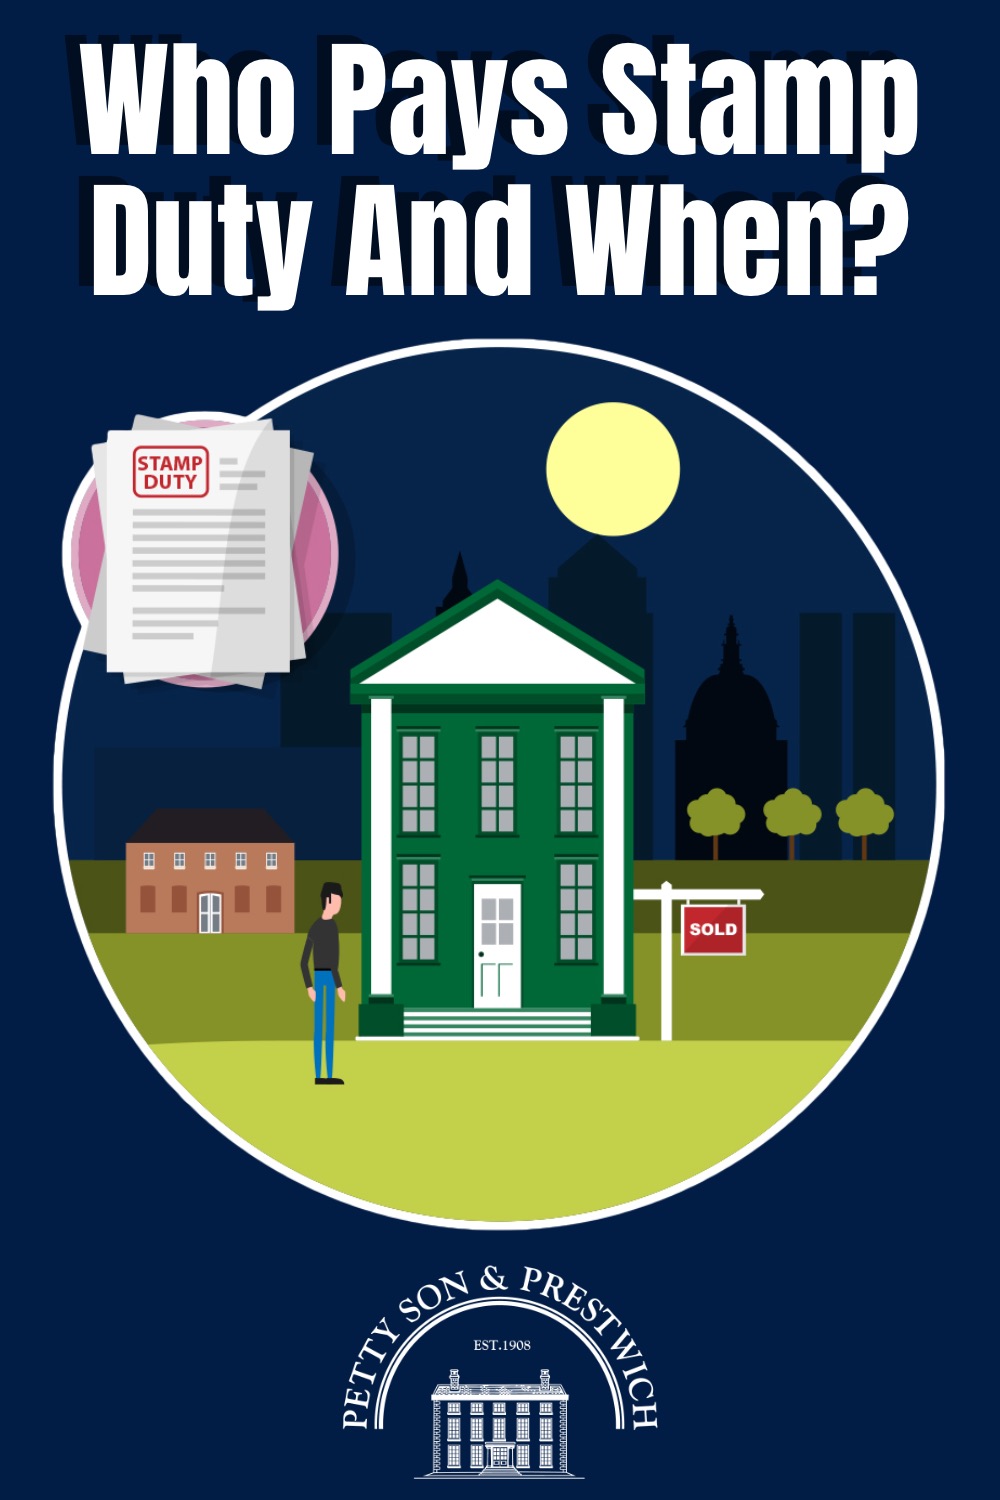 who pays stamp duty and when